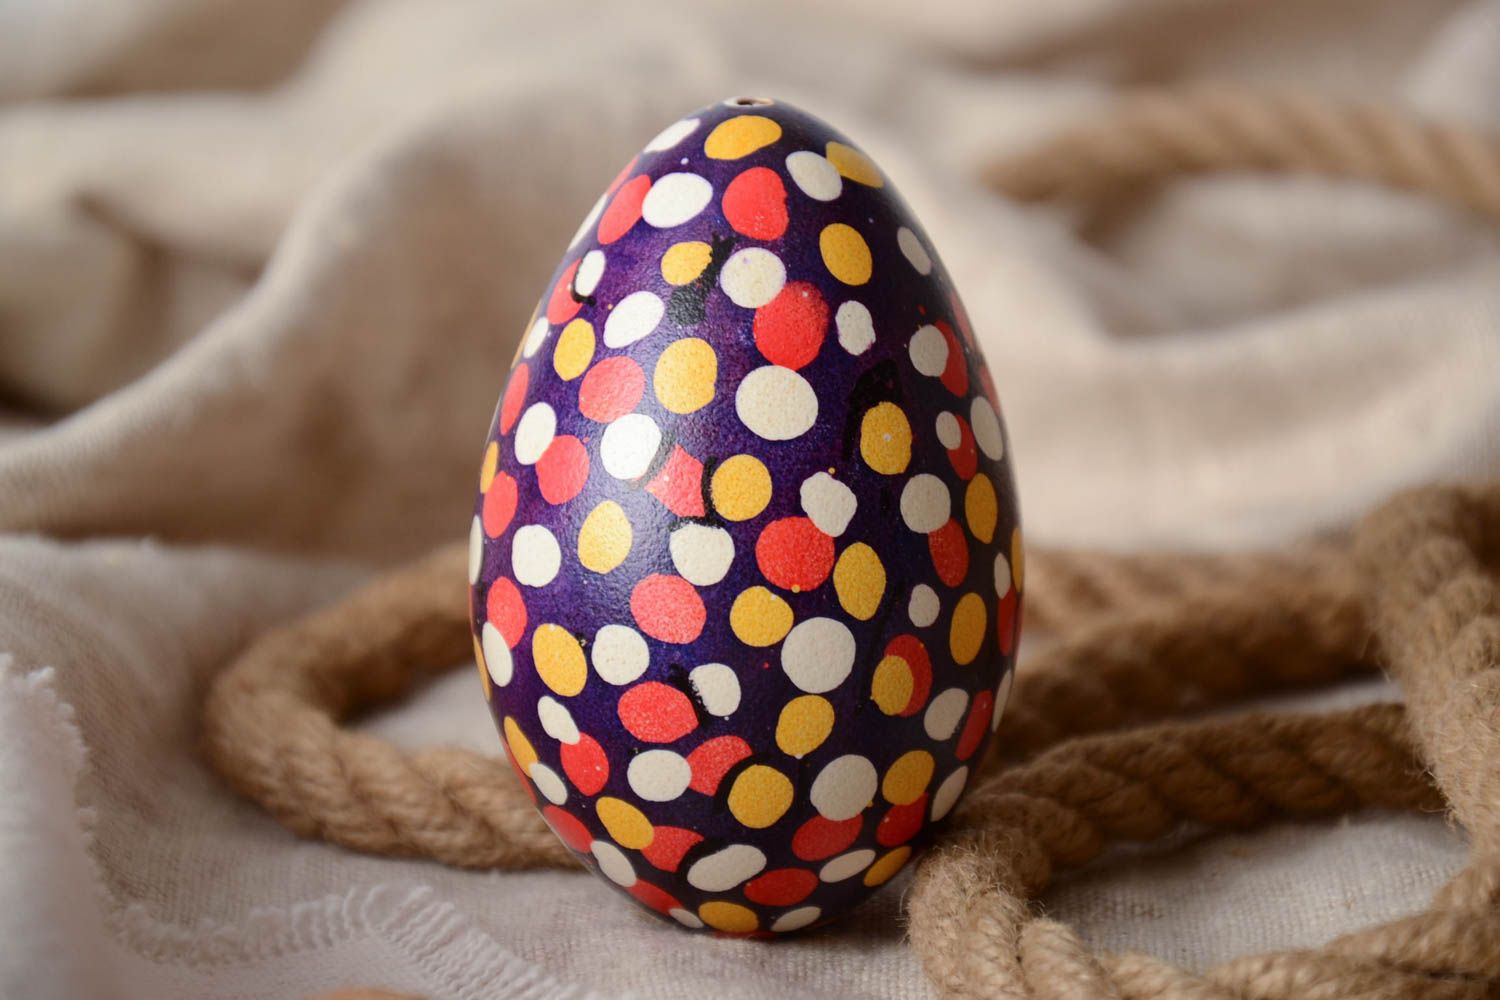 Handmade unusual Easter egg with colorful polka dot pattern on dark background photo 1